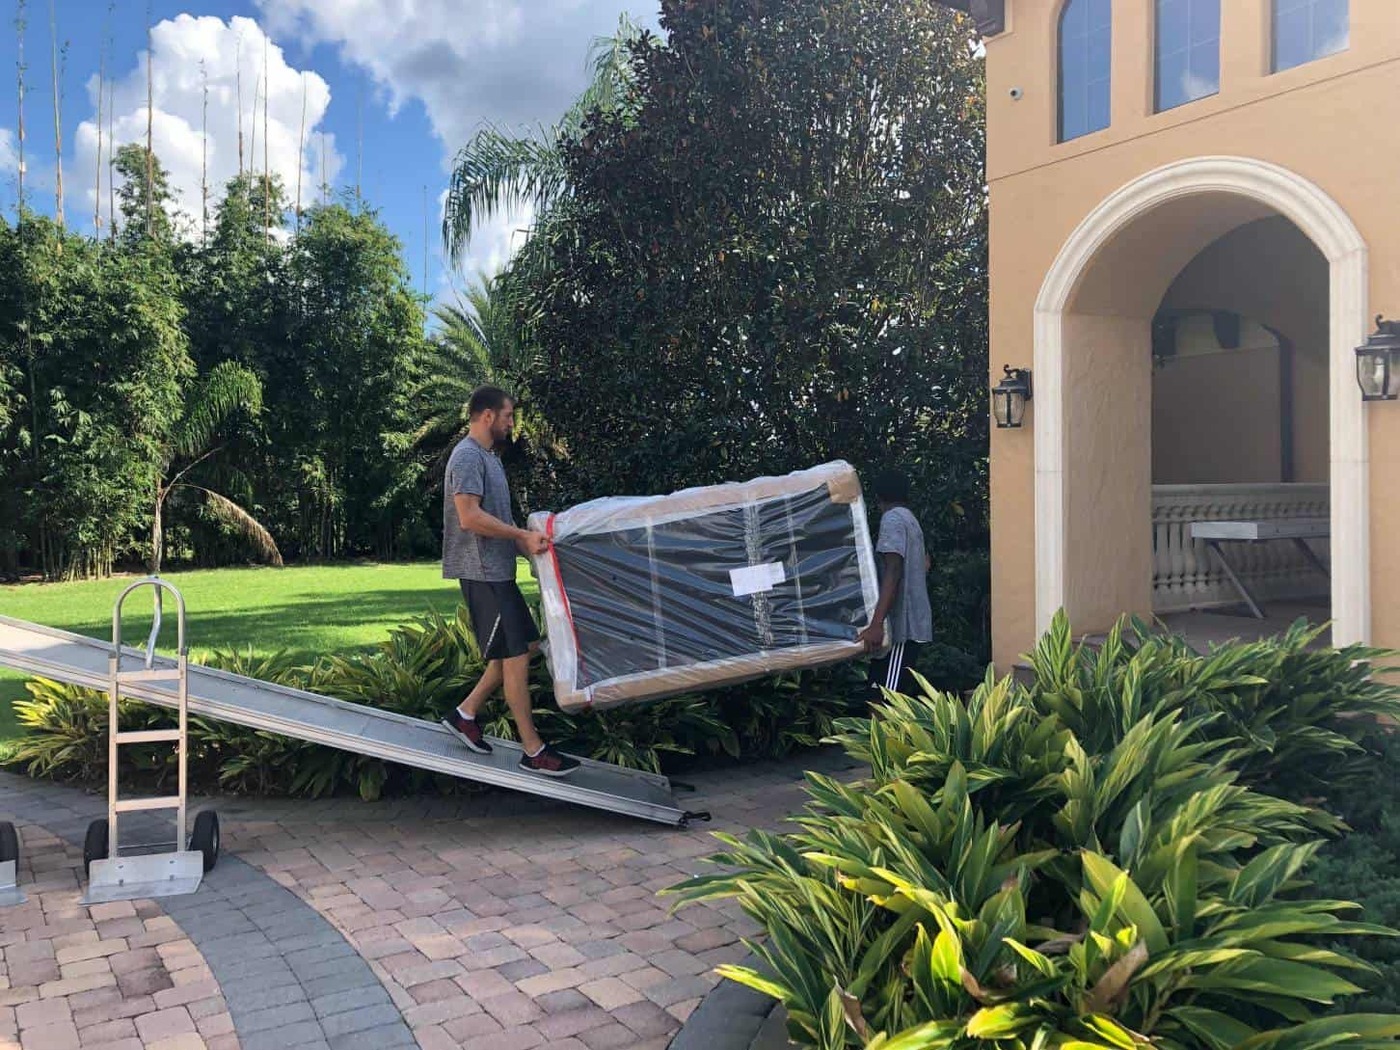 Teleport Moving And Storage For the past 15 years, the family owned business has made a name for itself by offering top-quality moving services and strong customer support to clients in Central Florida.